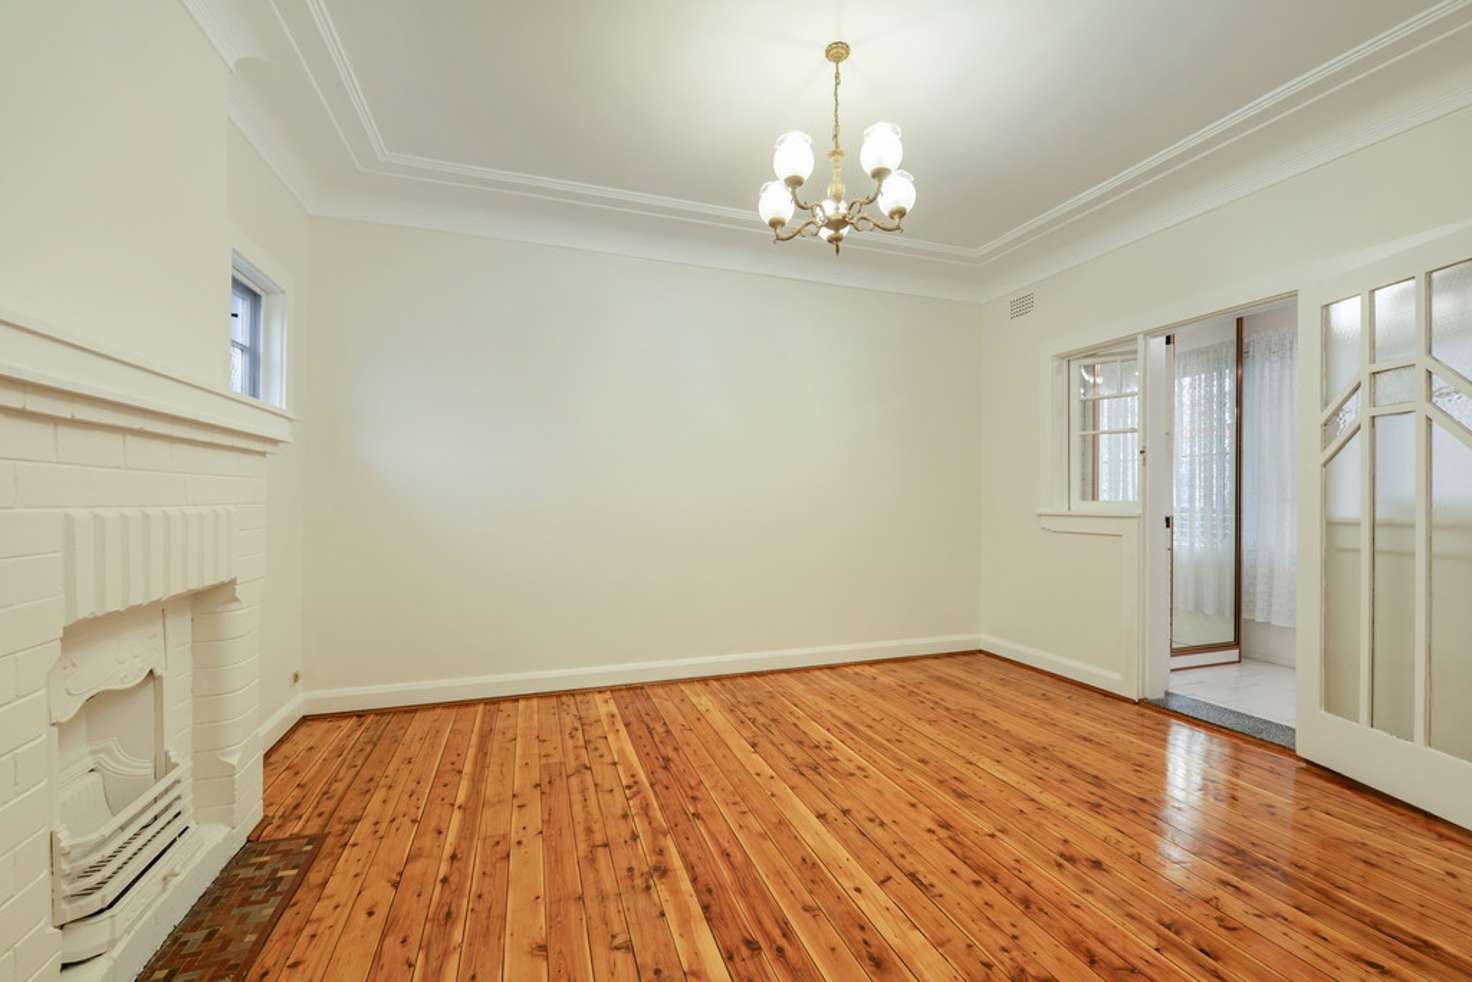 Main view of Homely house listing, 130 O'Riordan Street, Mascot NSW 2020